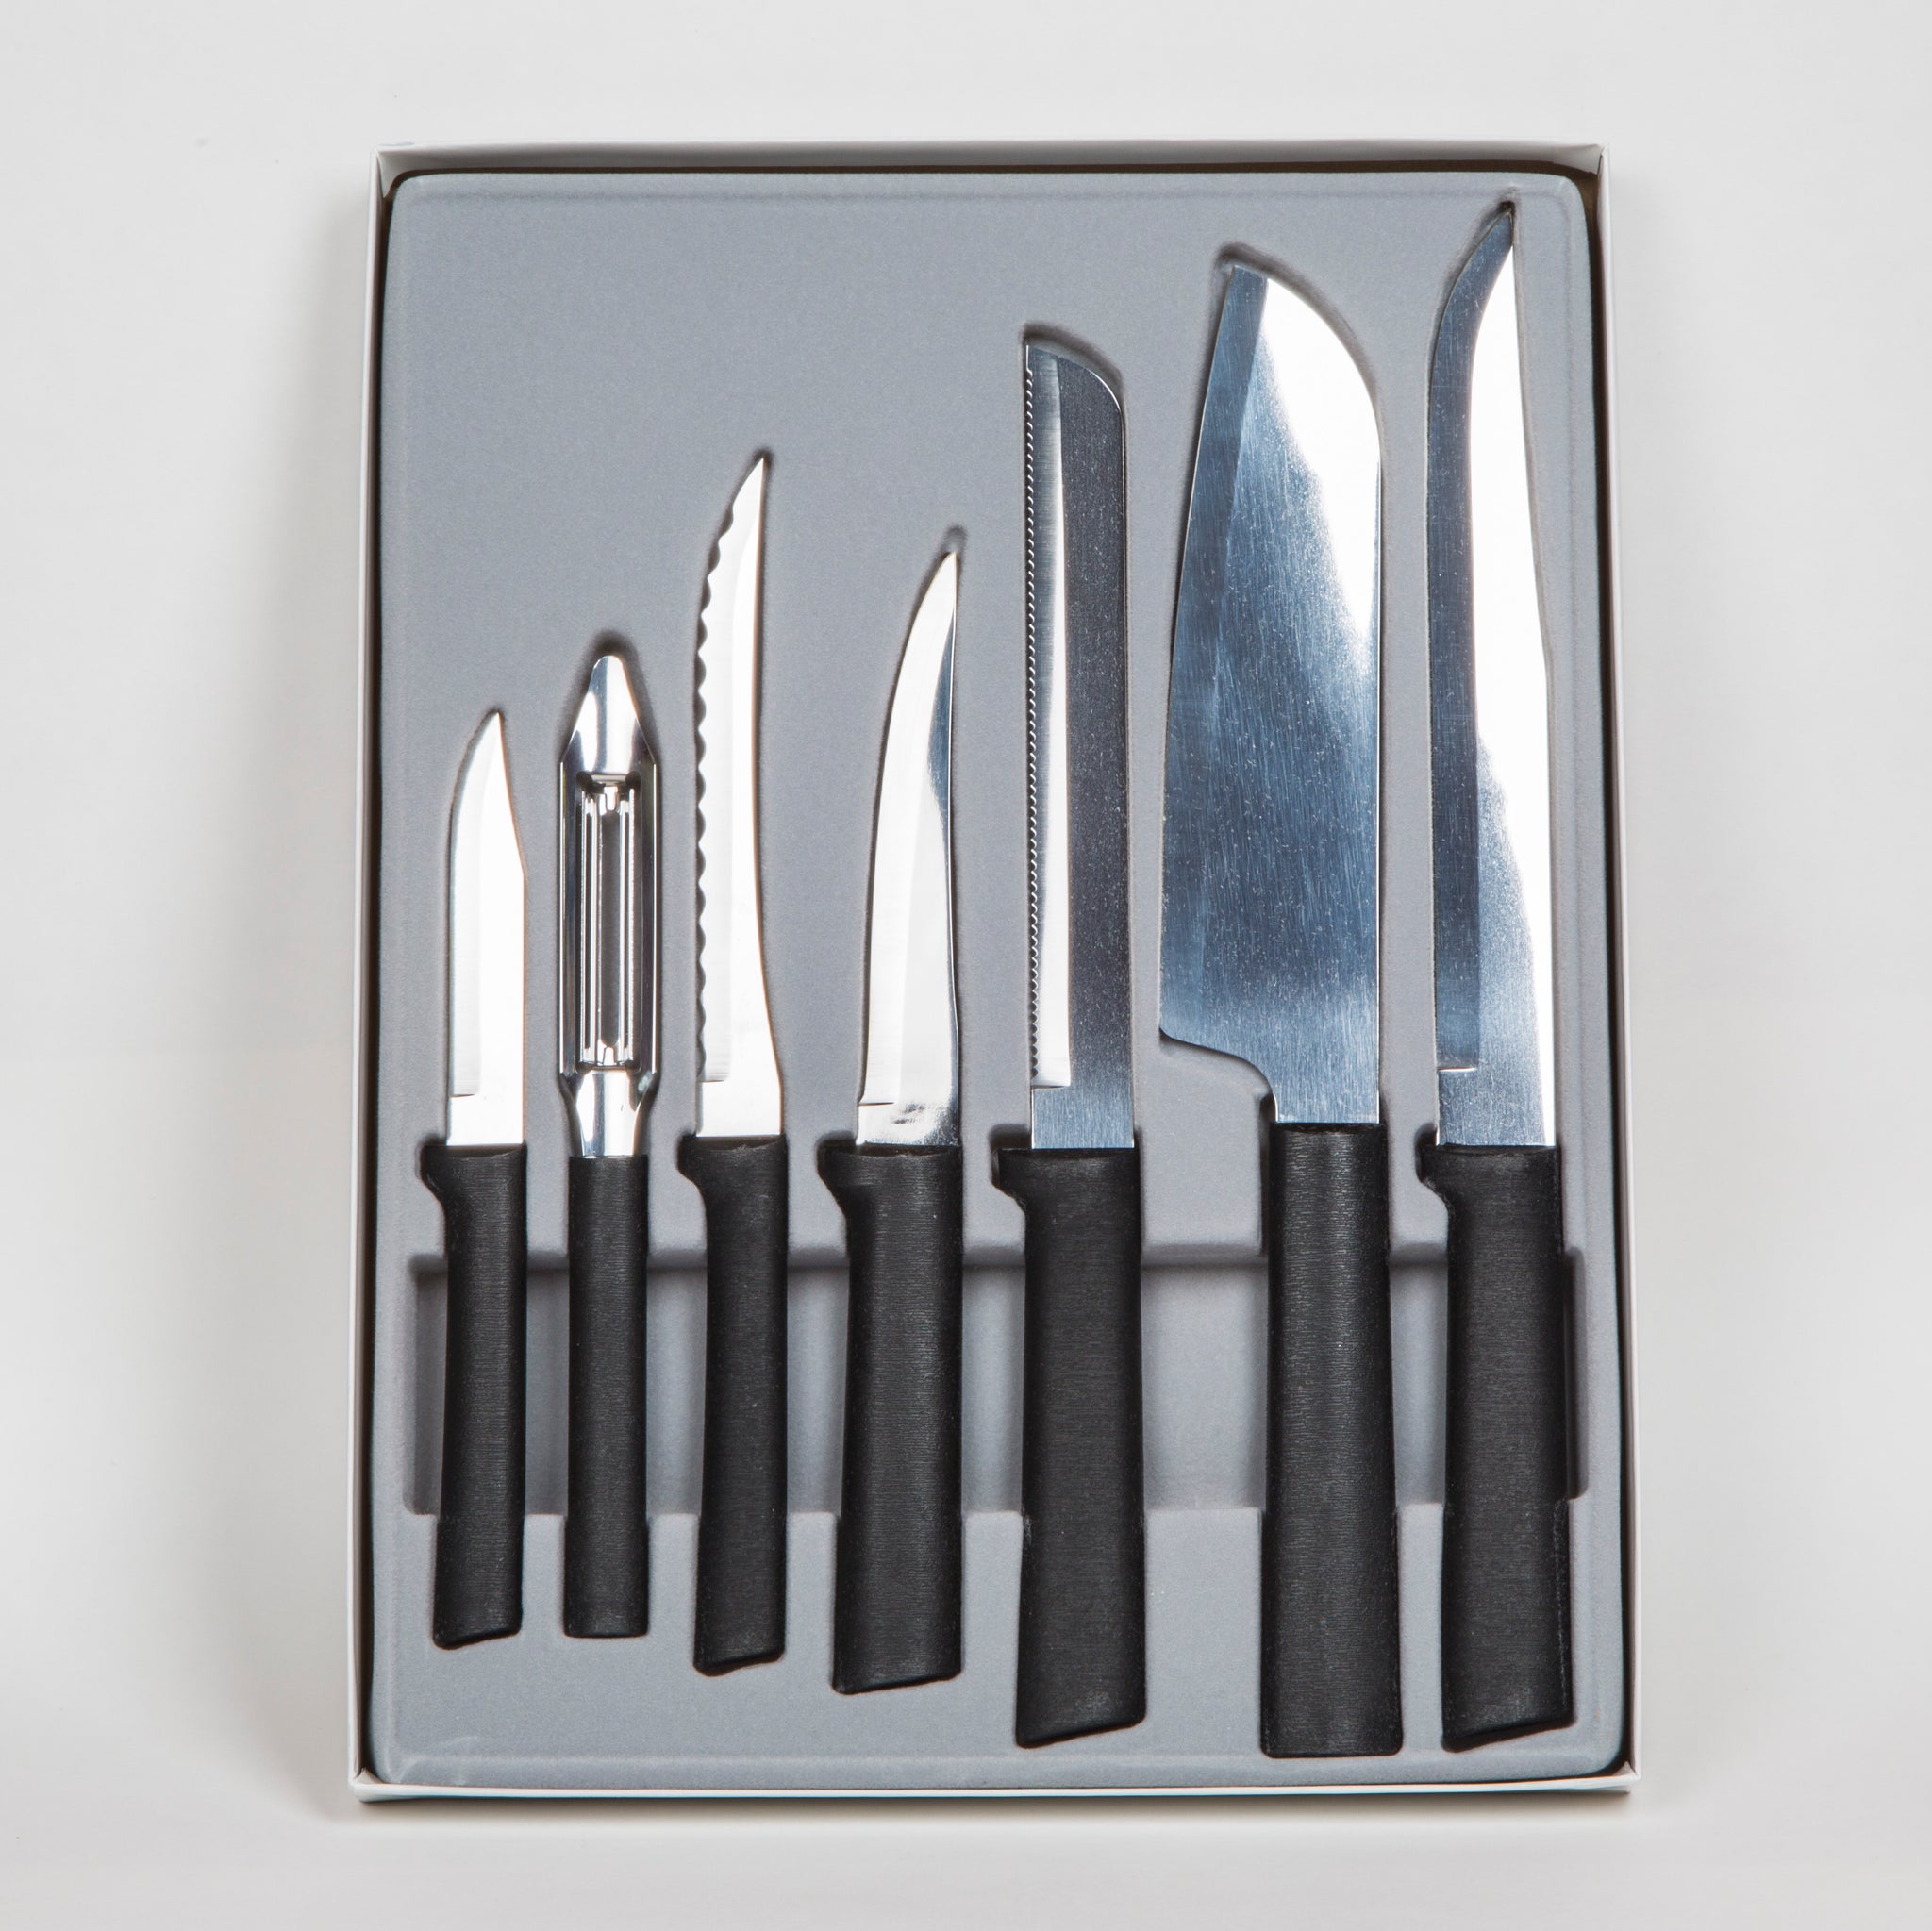 Rada Cutlery Knife Set - Stainless Steel Culinary Knives